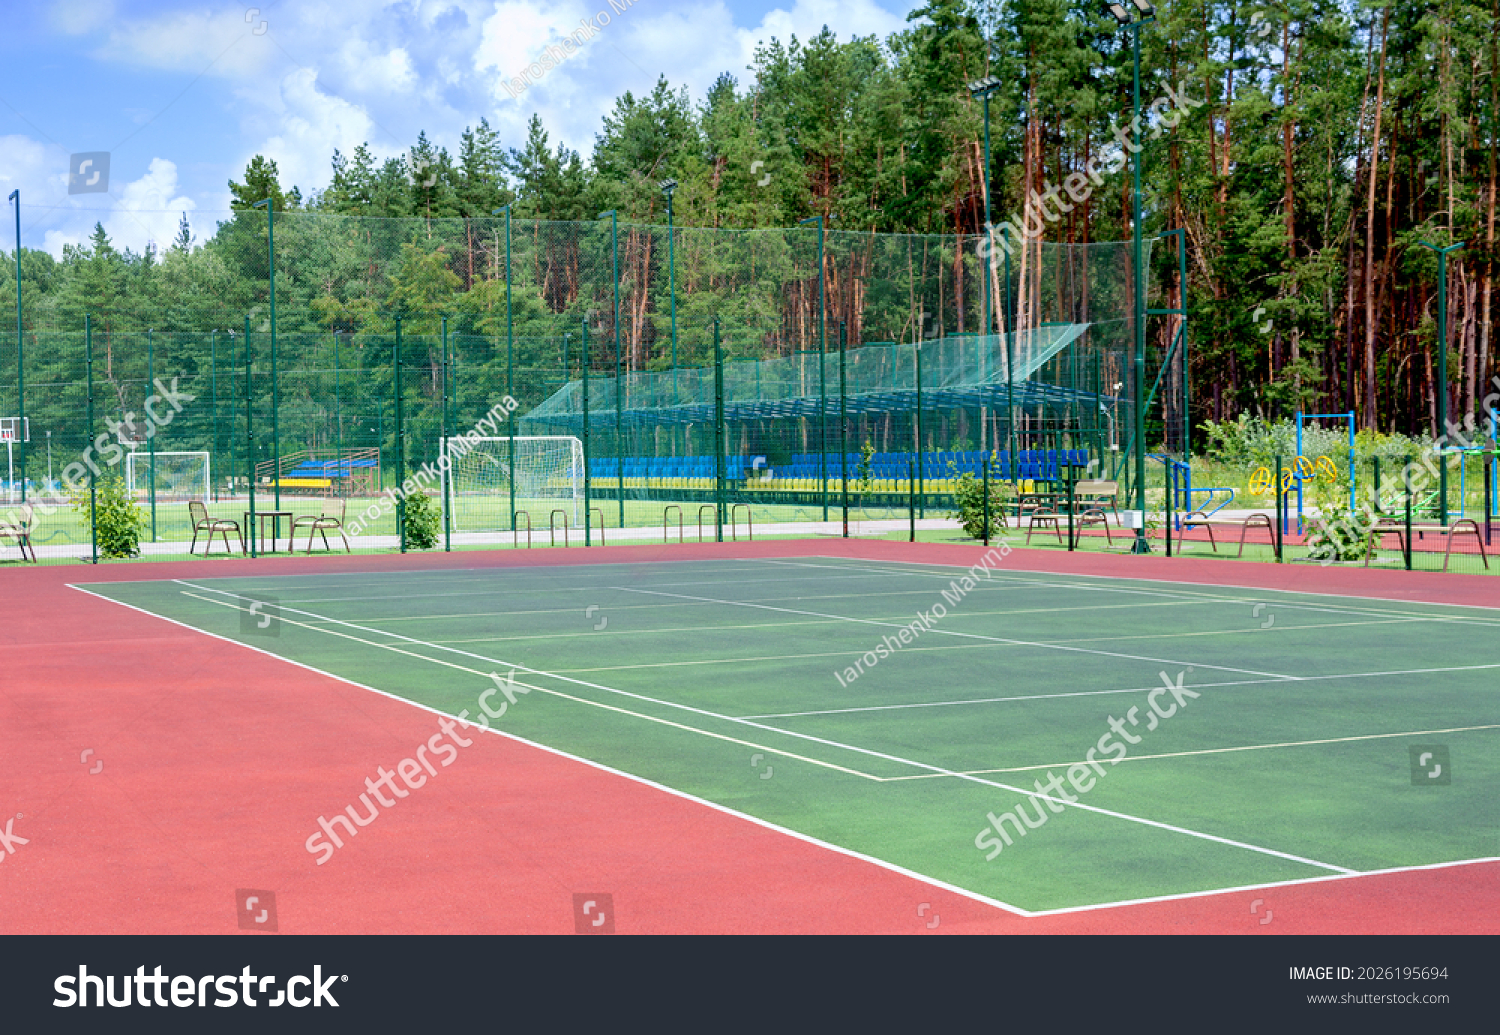 Sports ground on the outskirts of the city in a wooded area. View of the tennis court, fitness equipment, football field and others public sports grounds for team games of sport. #2026195694